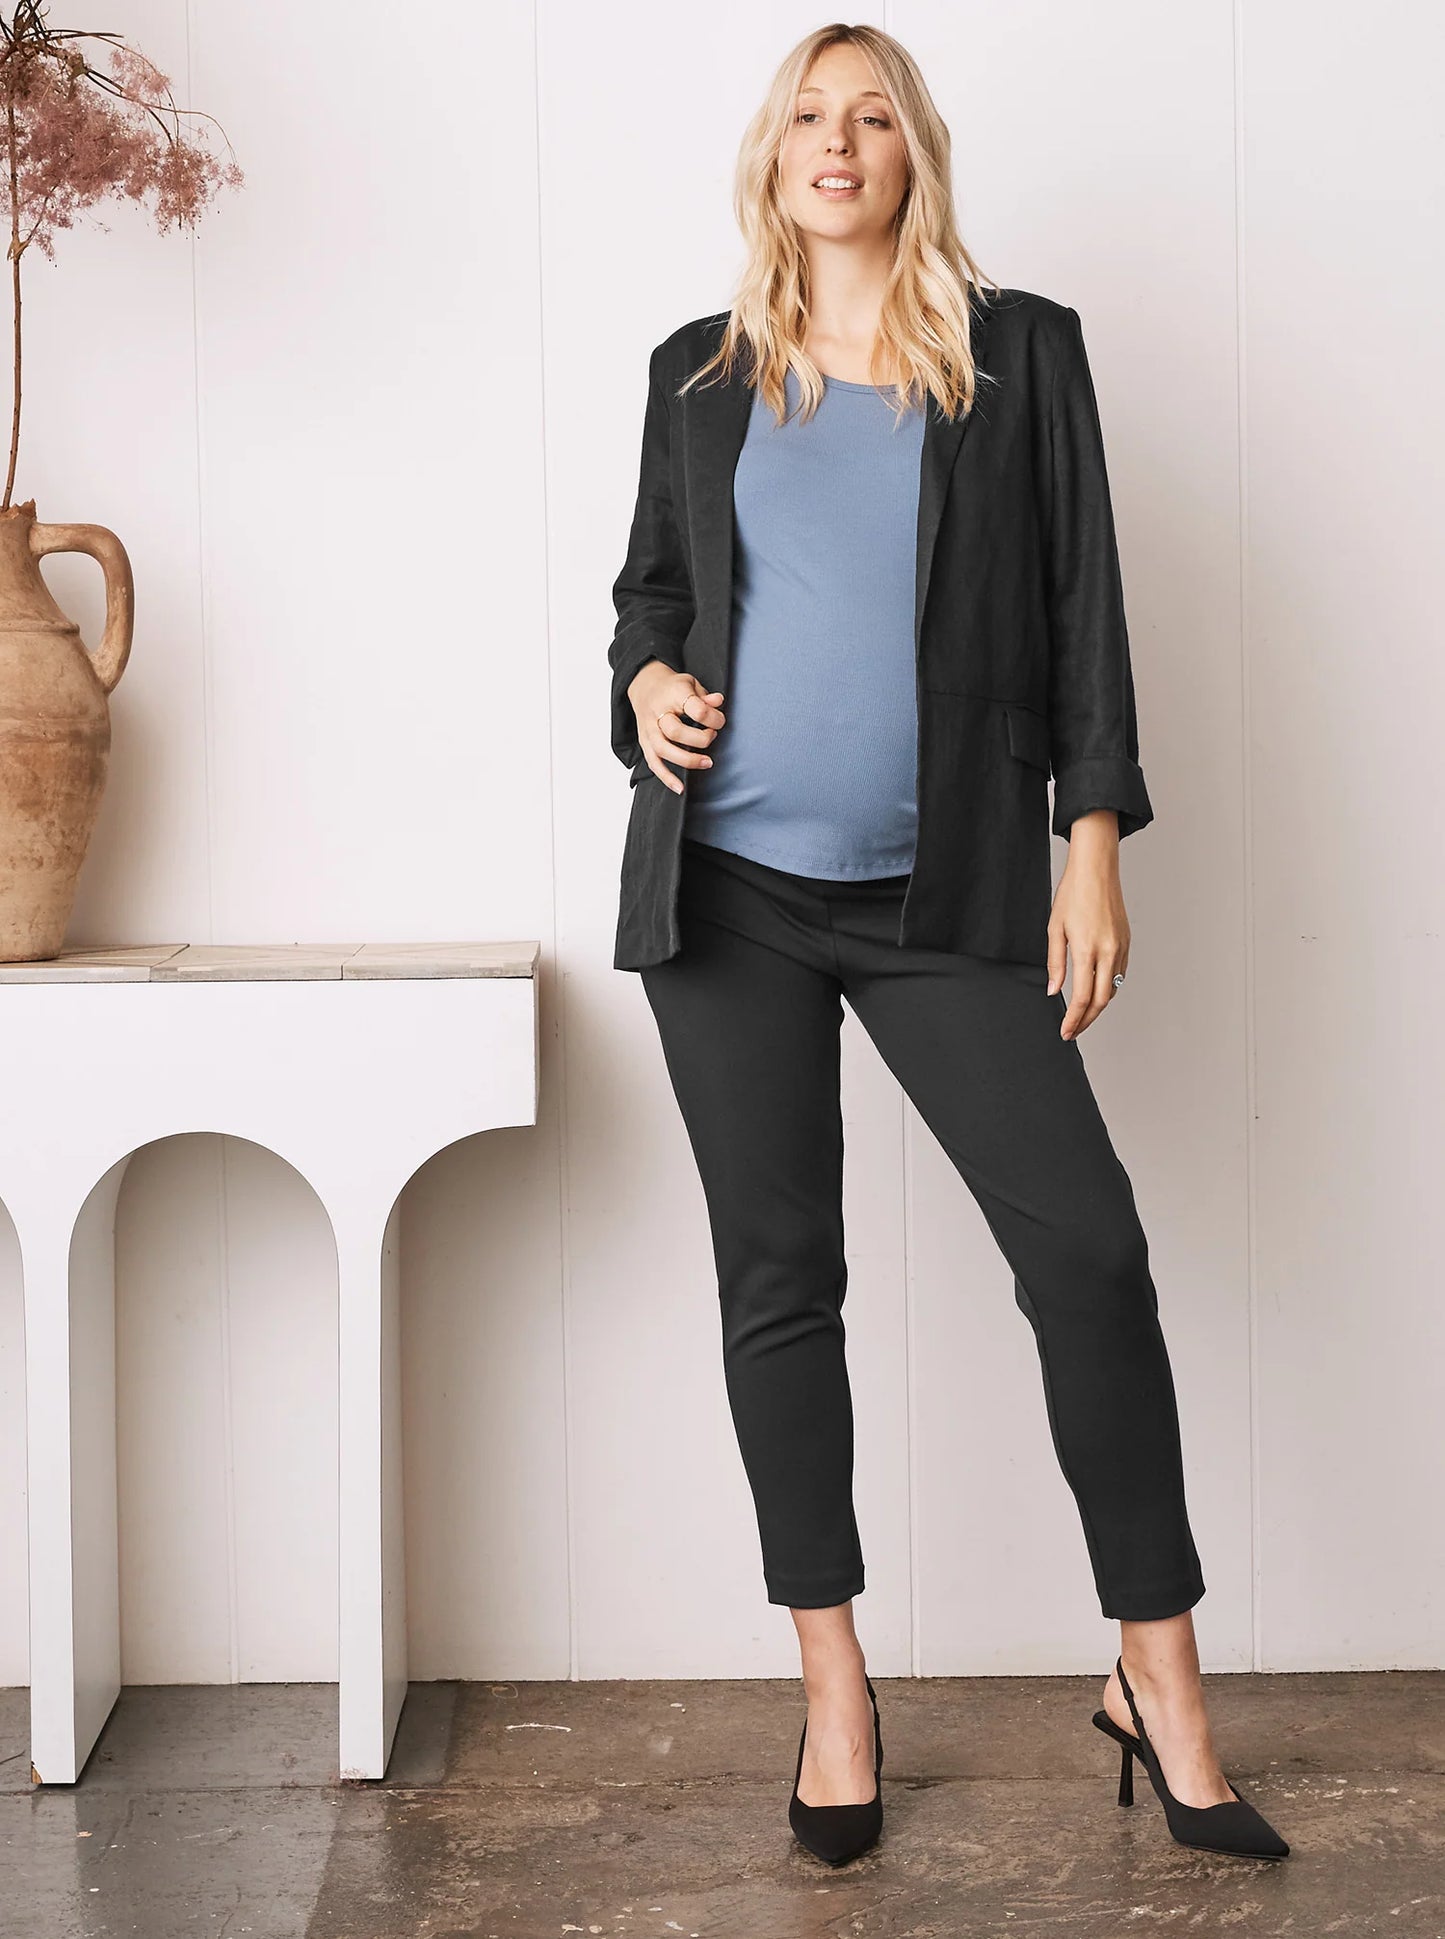 Relaxed Fit Stretch Work Pants - Black